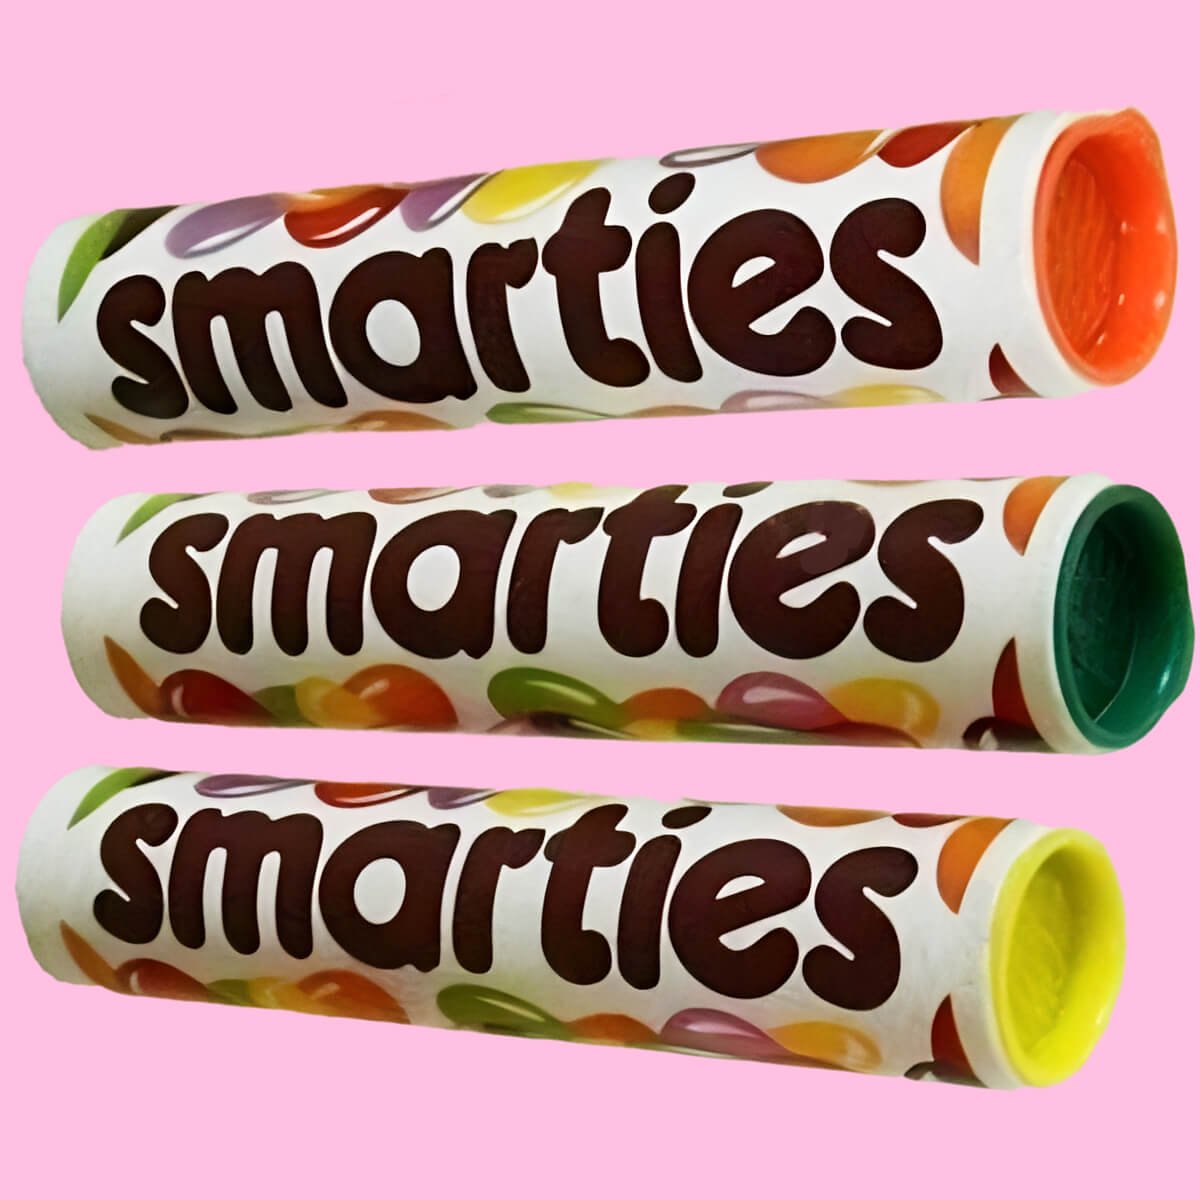 Three tubes of Smarties from the 1980s with orange, green and yellow caps